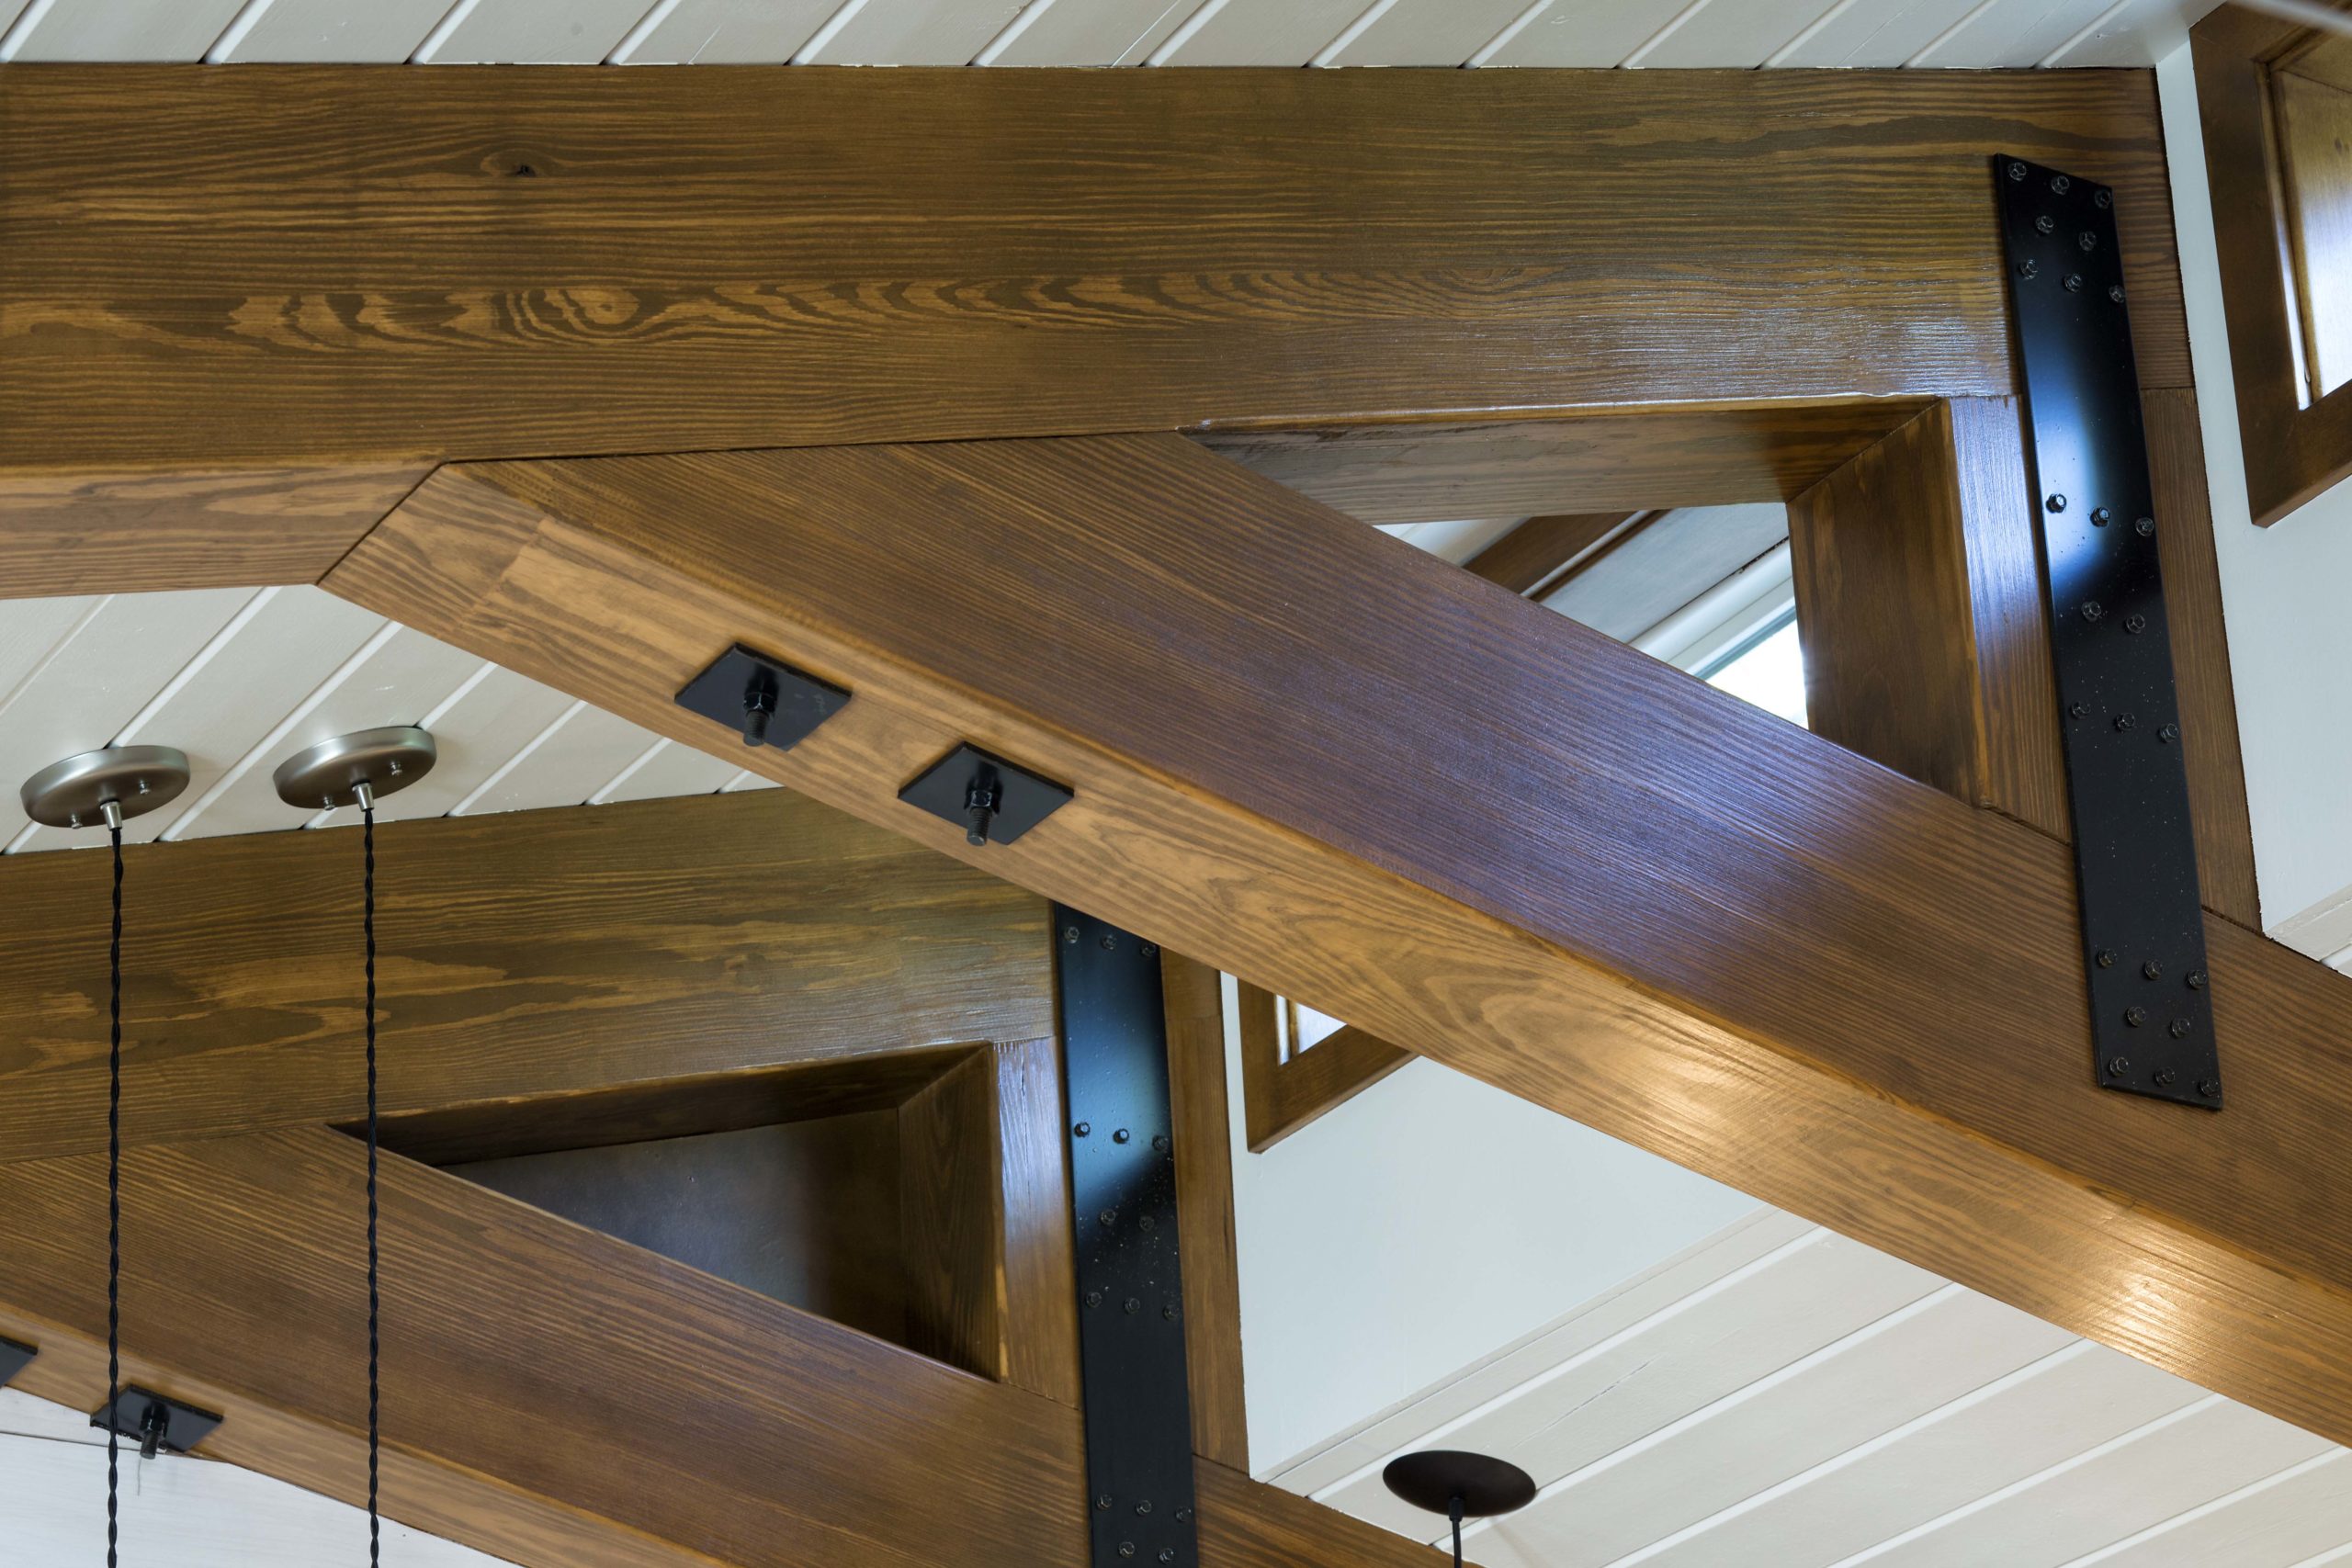 A wooden beam in the ceiling of a room.